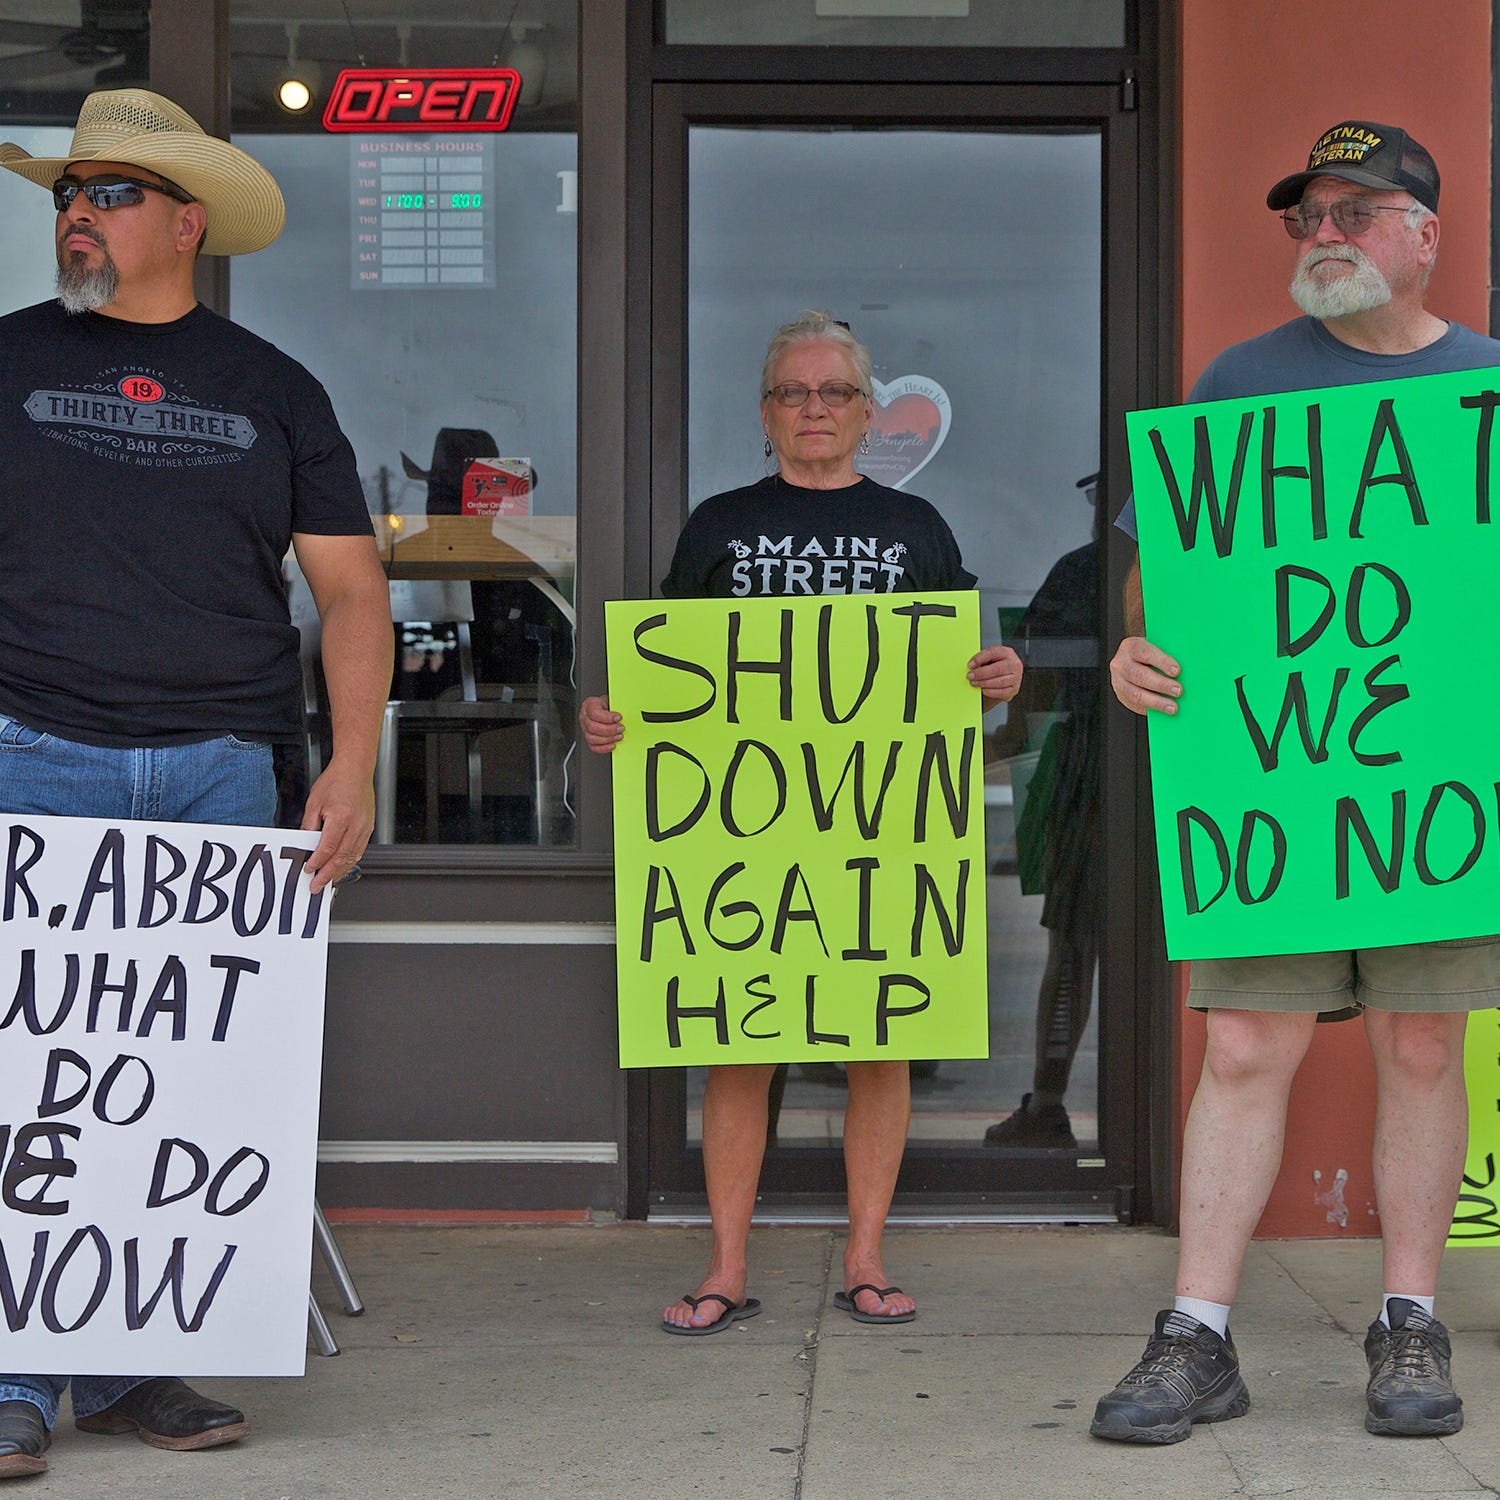 Demonstrators protest in downtown San Angelo on Saturday, June 27, 2020 against the governor's order to close bars again due to rising positive cases of the coronavirus.